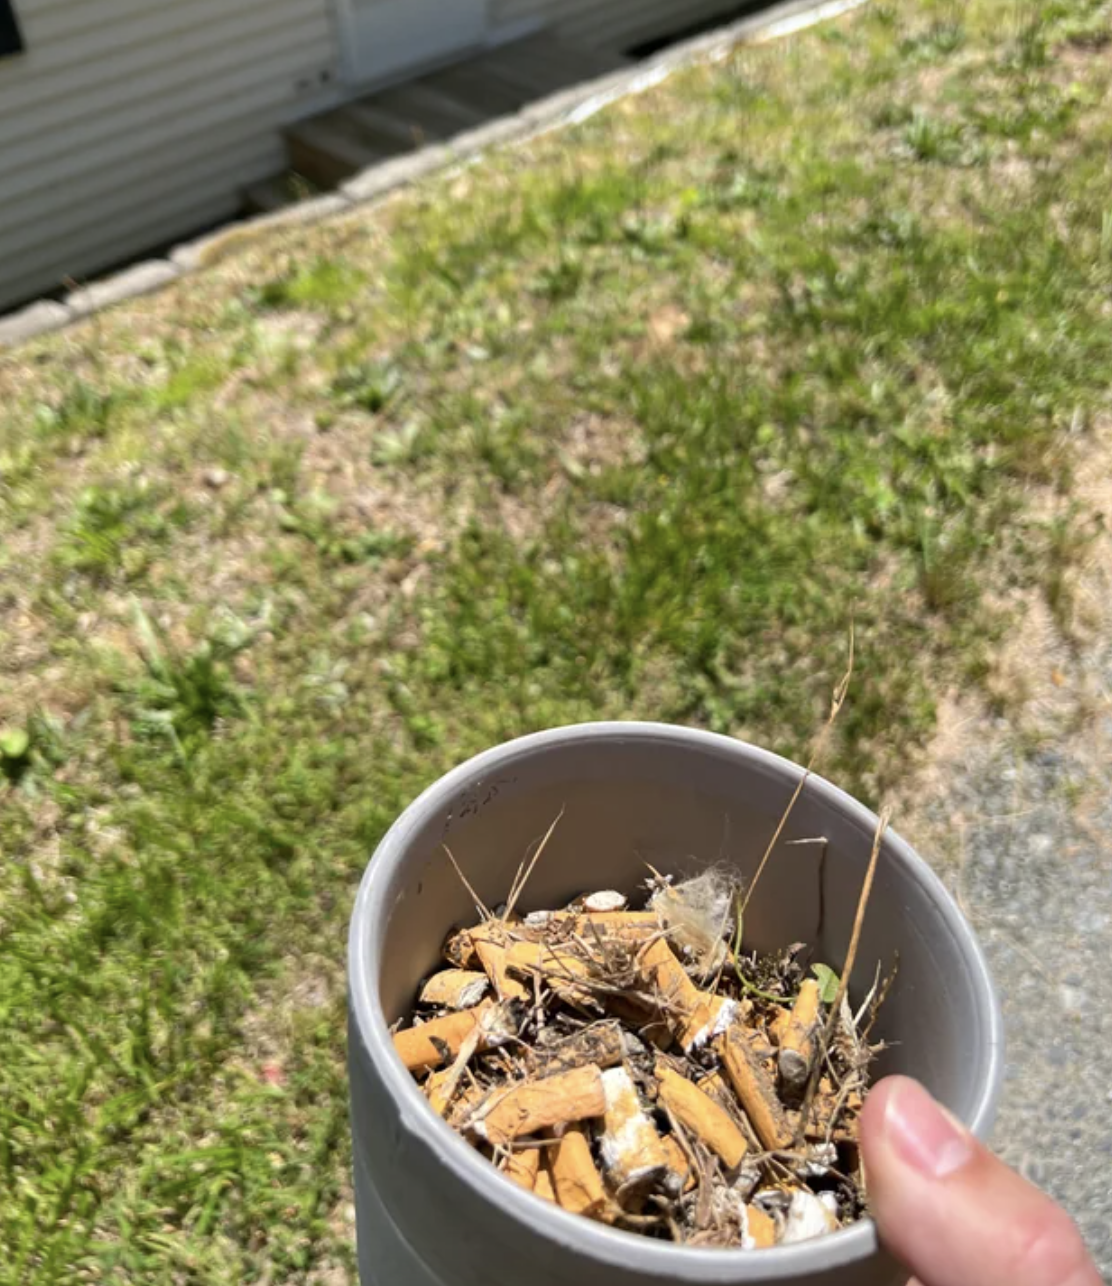 cig butts collected in a cup